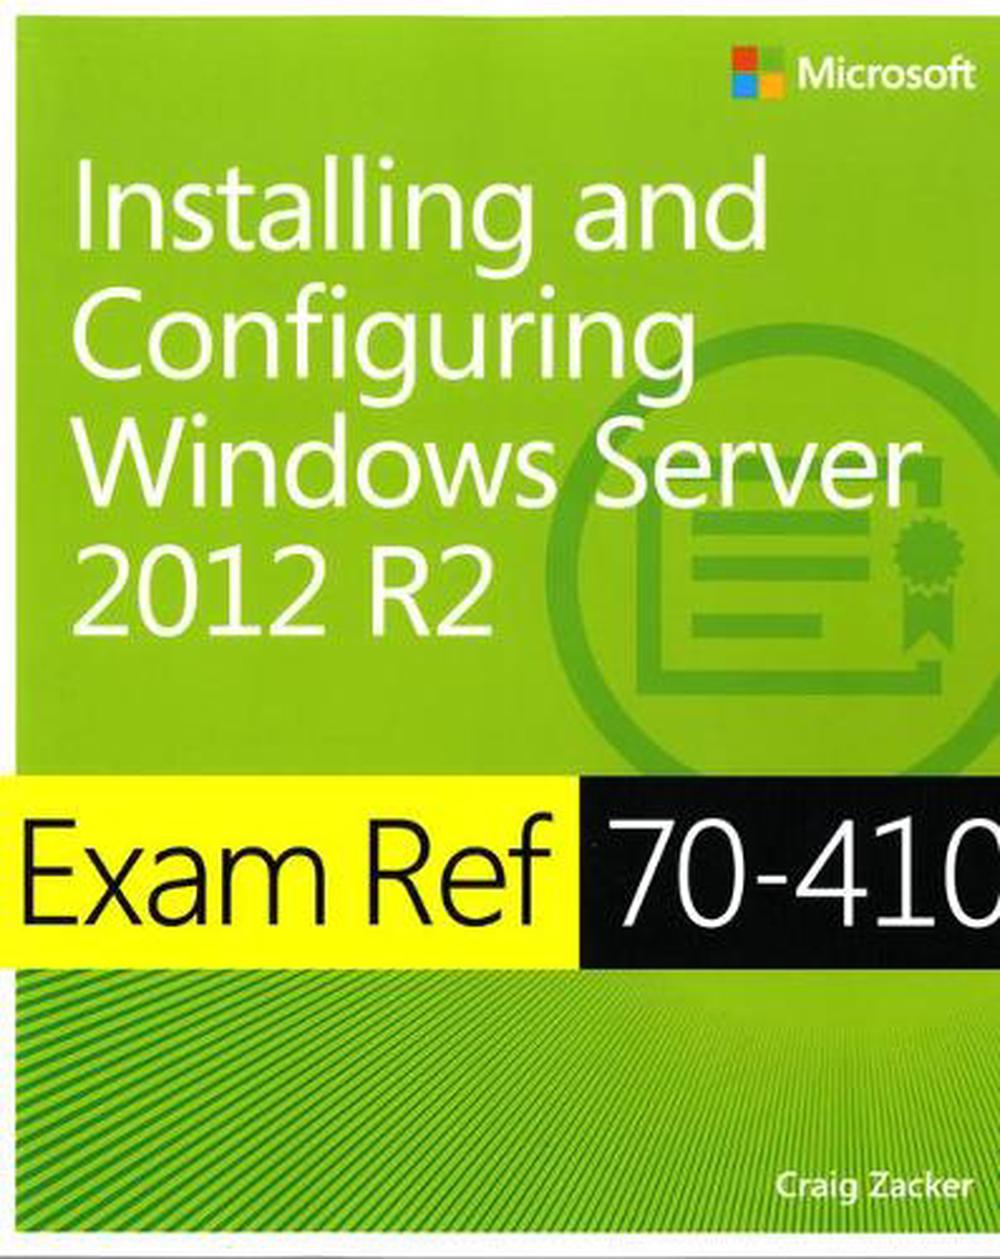 Exam Ref 70410 Installing and Configuring Windows Server 2012 R2 by